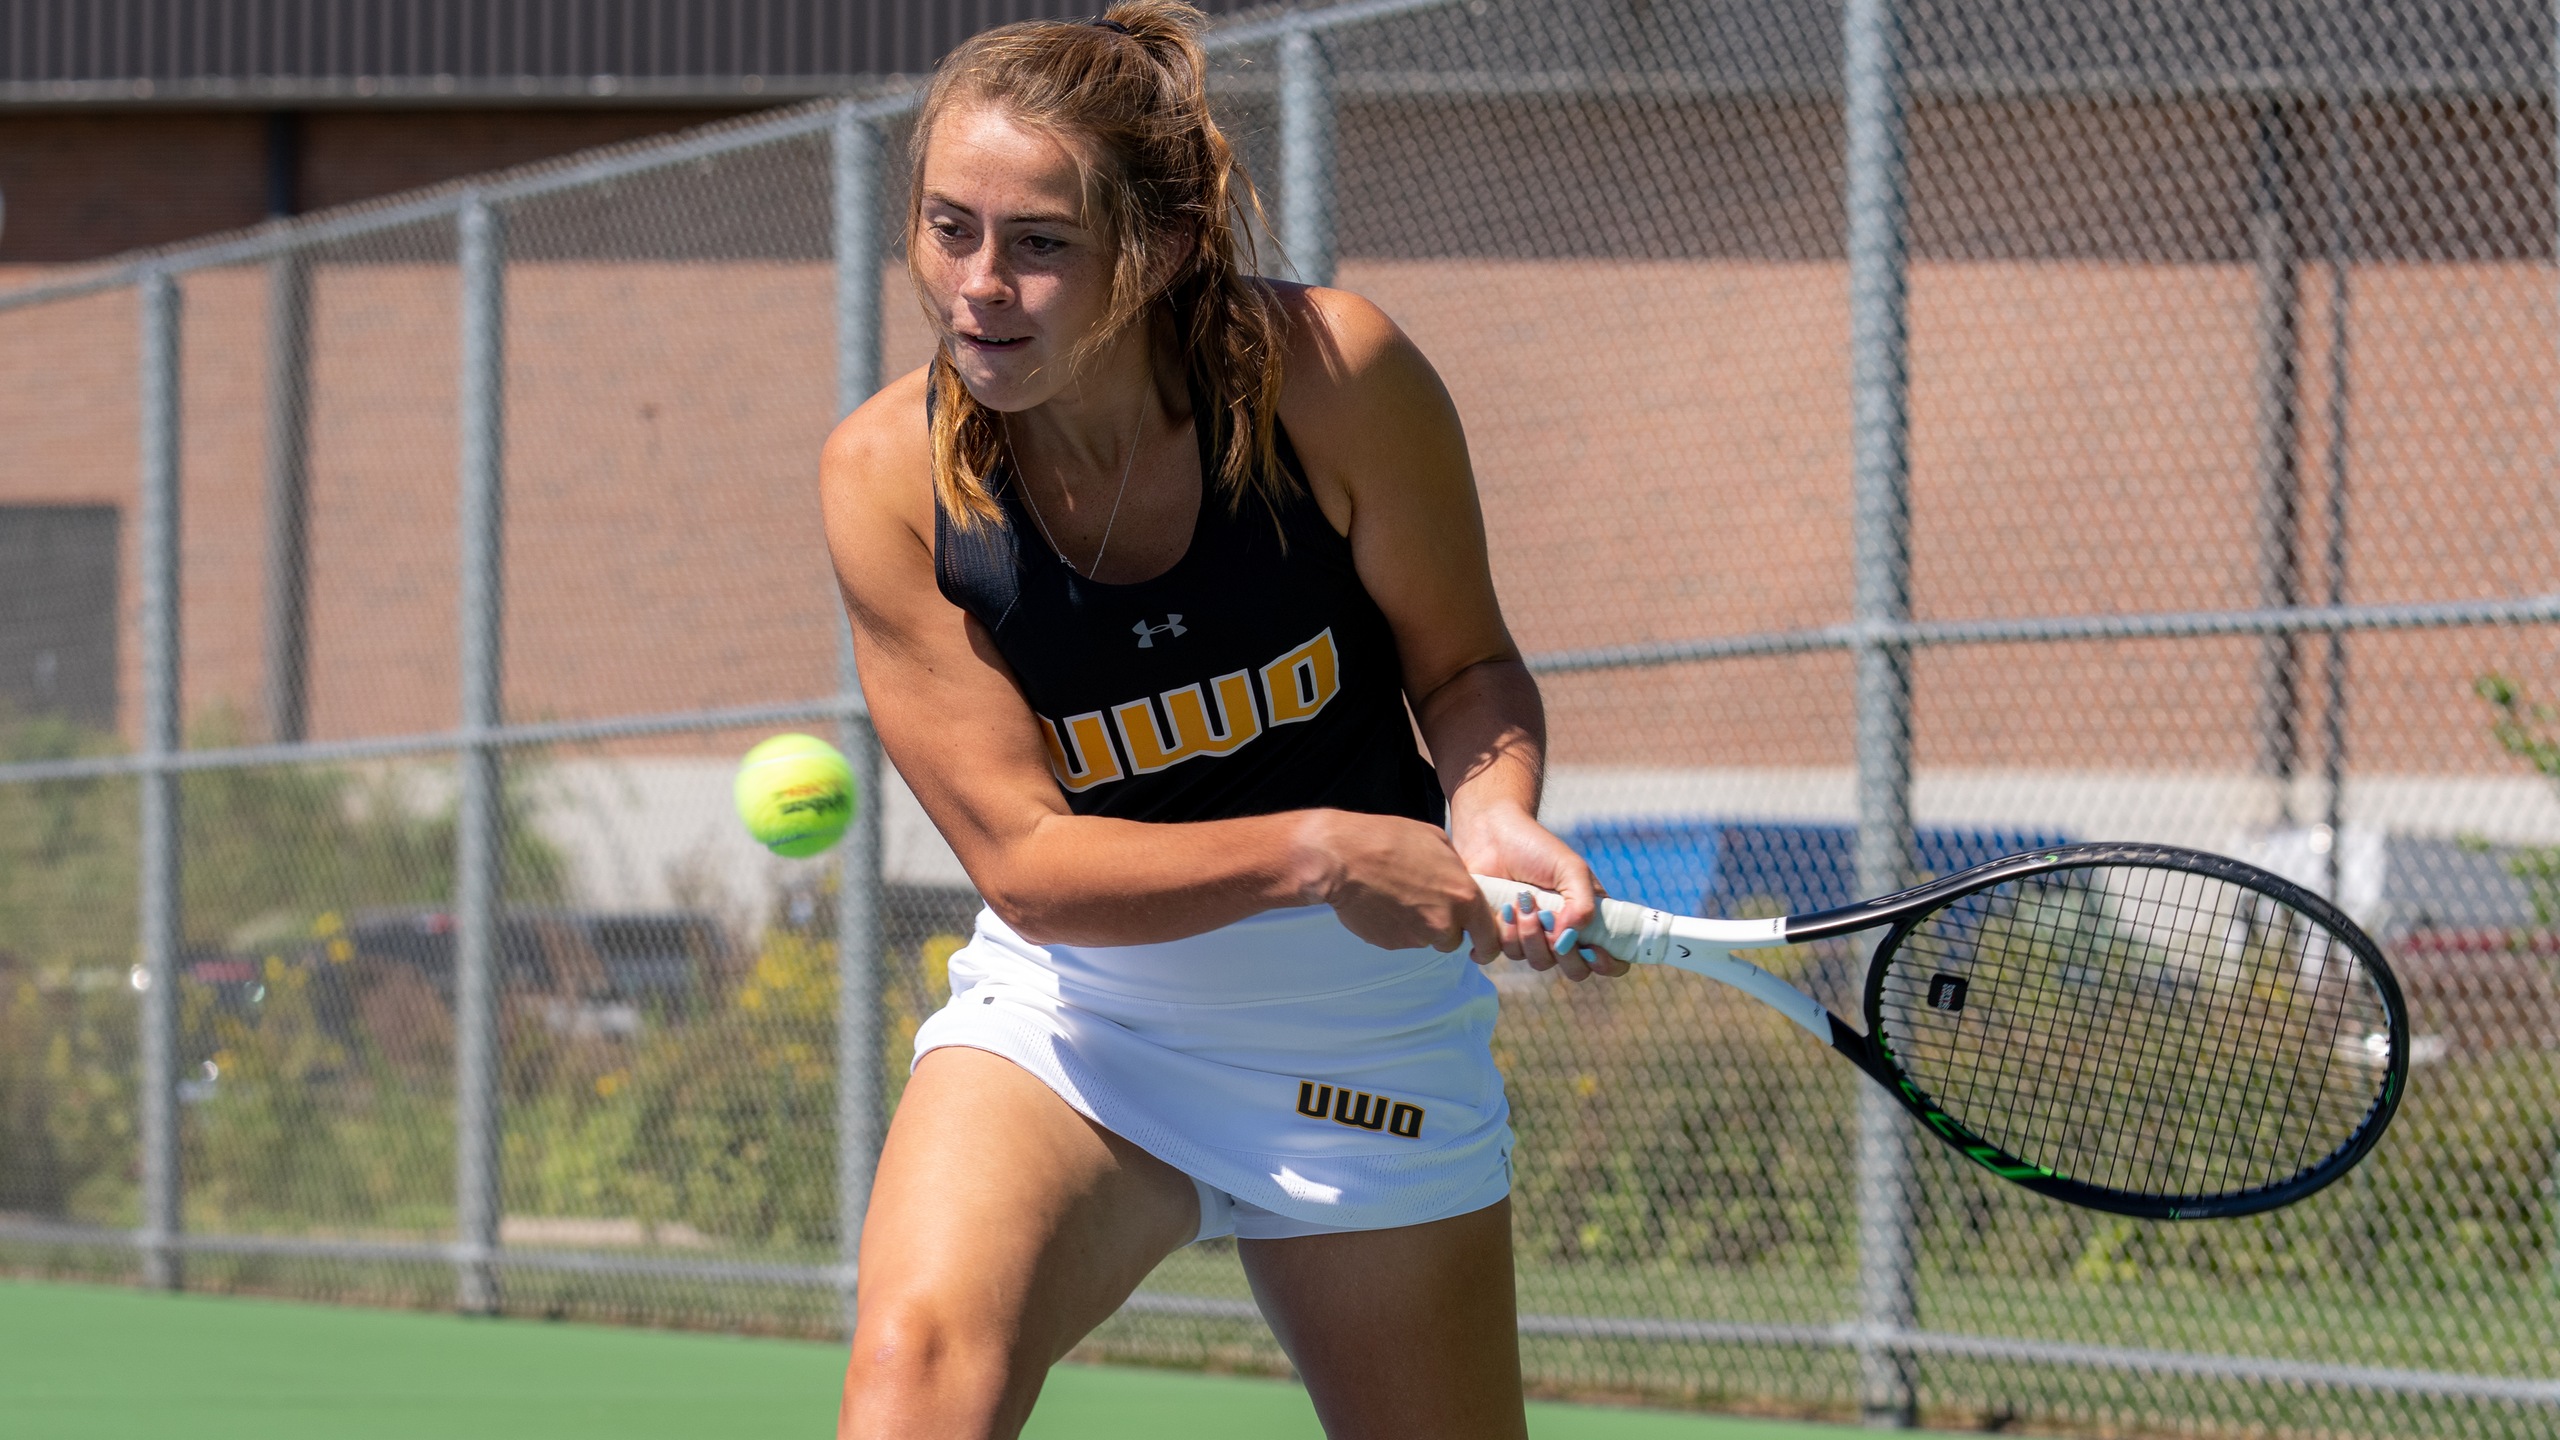 Alyssa Pattee competed for the Titans at both No. 2 singles and No. 1 doubles in her collegiate debut.